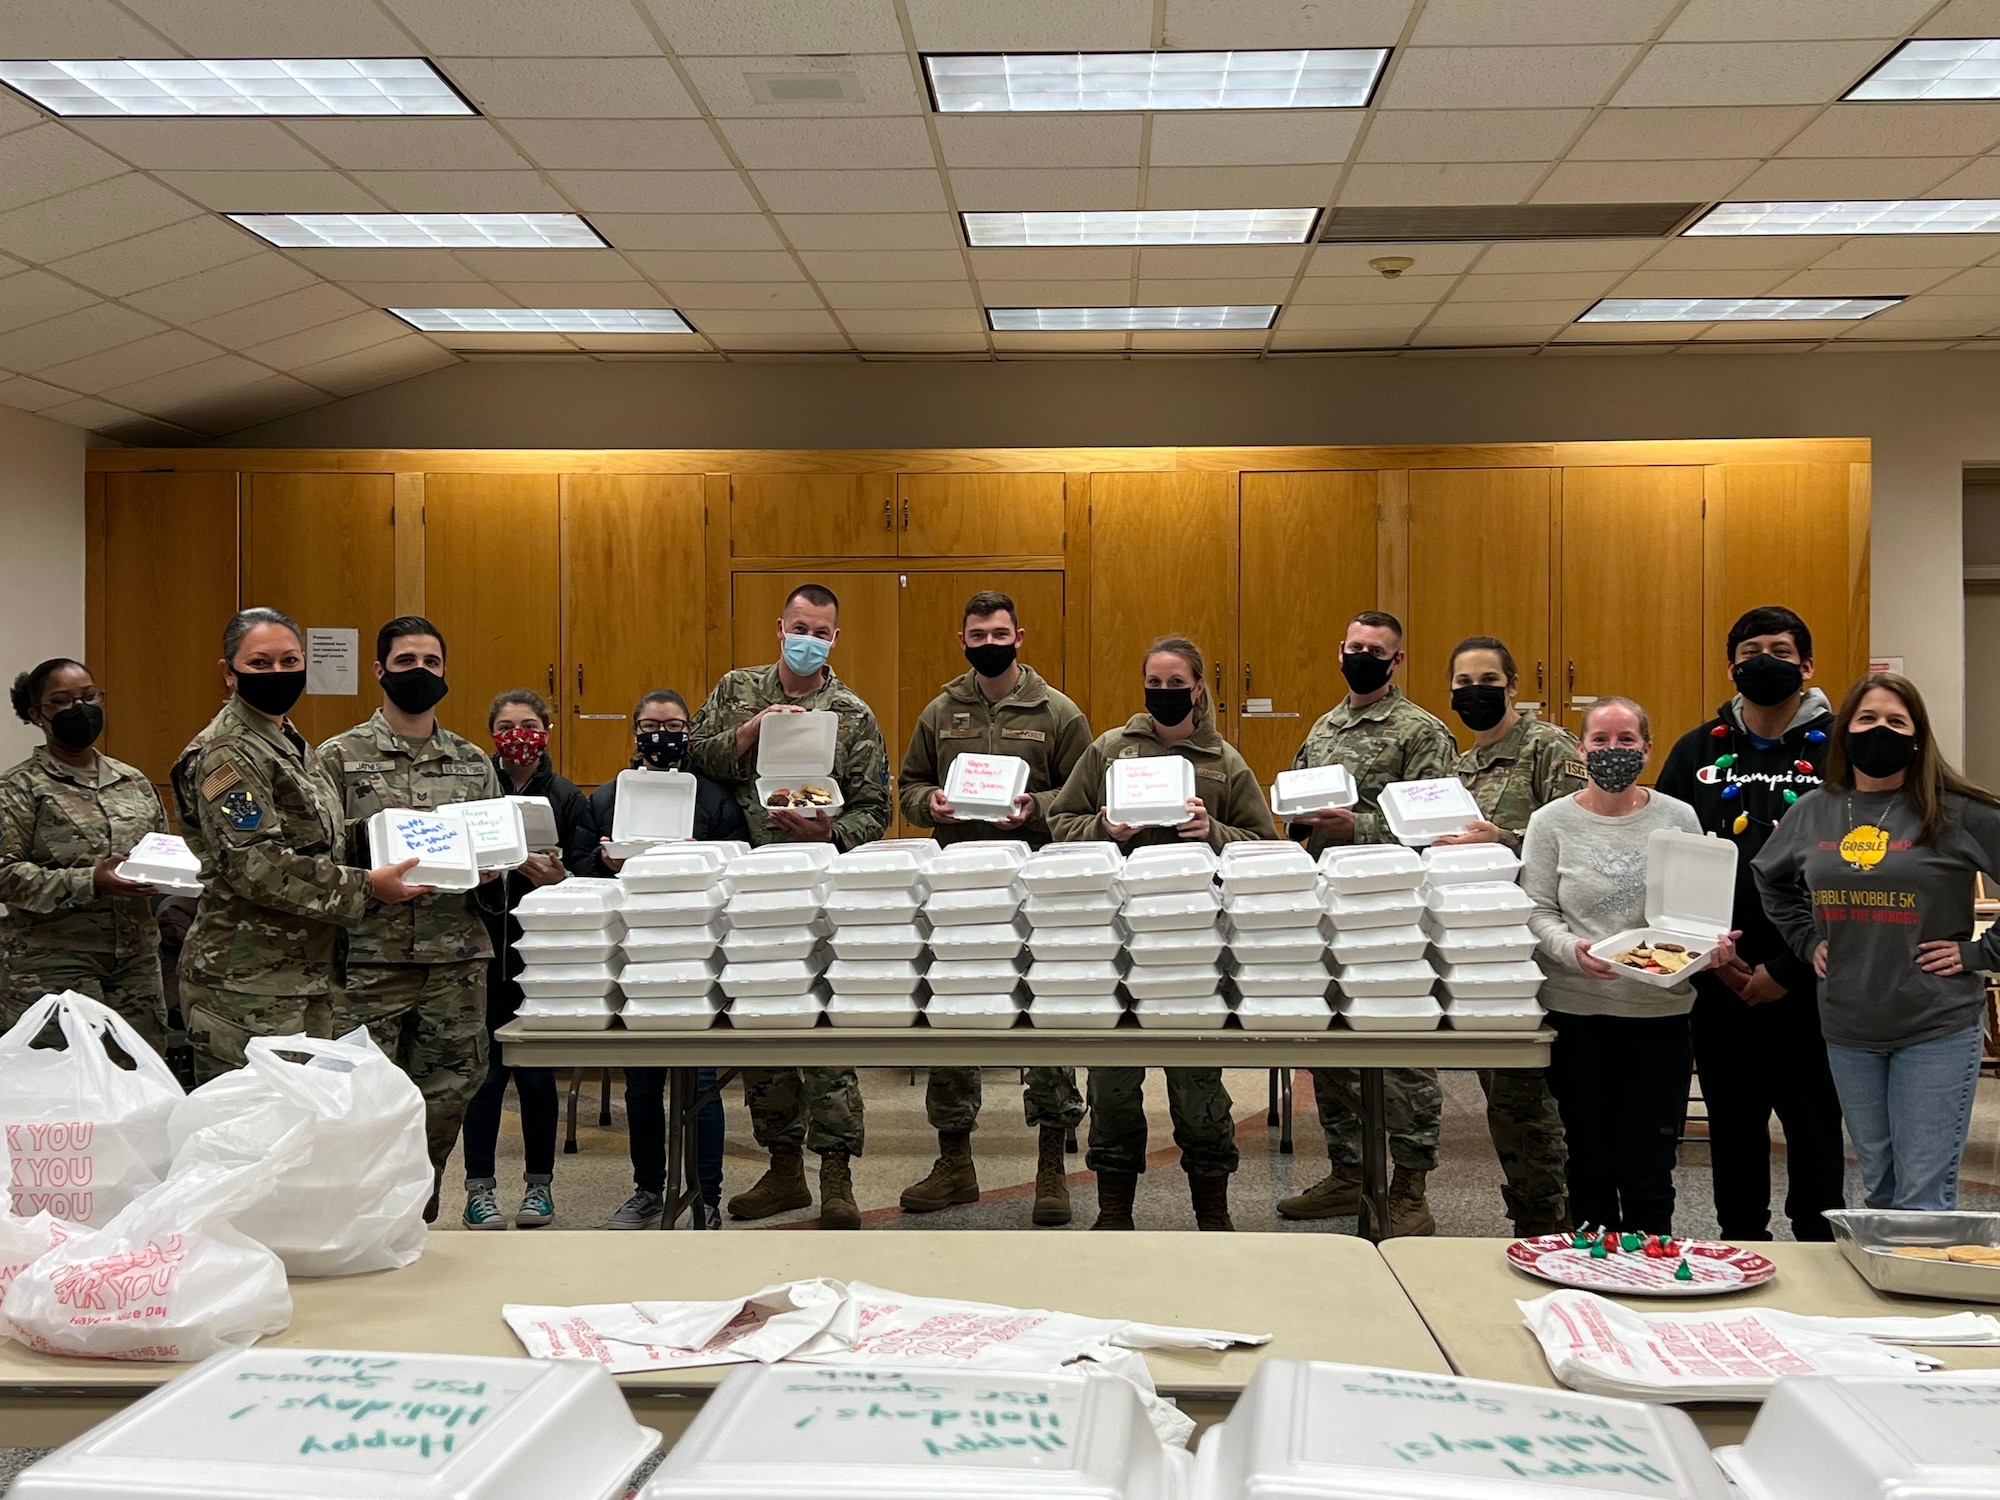 Chief Master Sgt. Sevin Balkuvvar poses for photo with fellow teammates who are building to-go boxes filled with holiday treats for servicemembers.